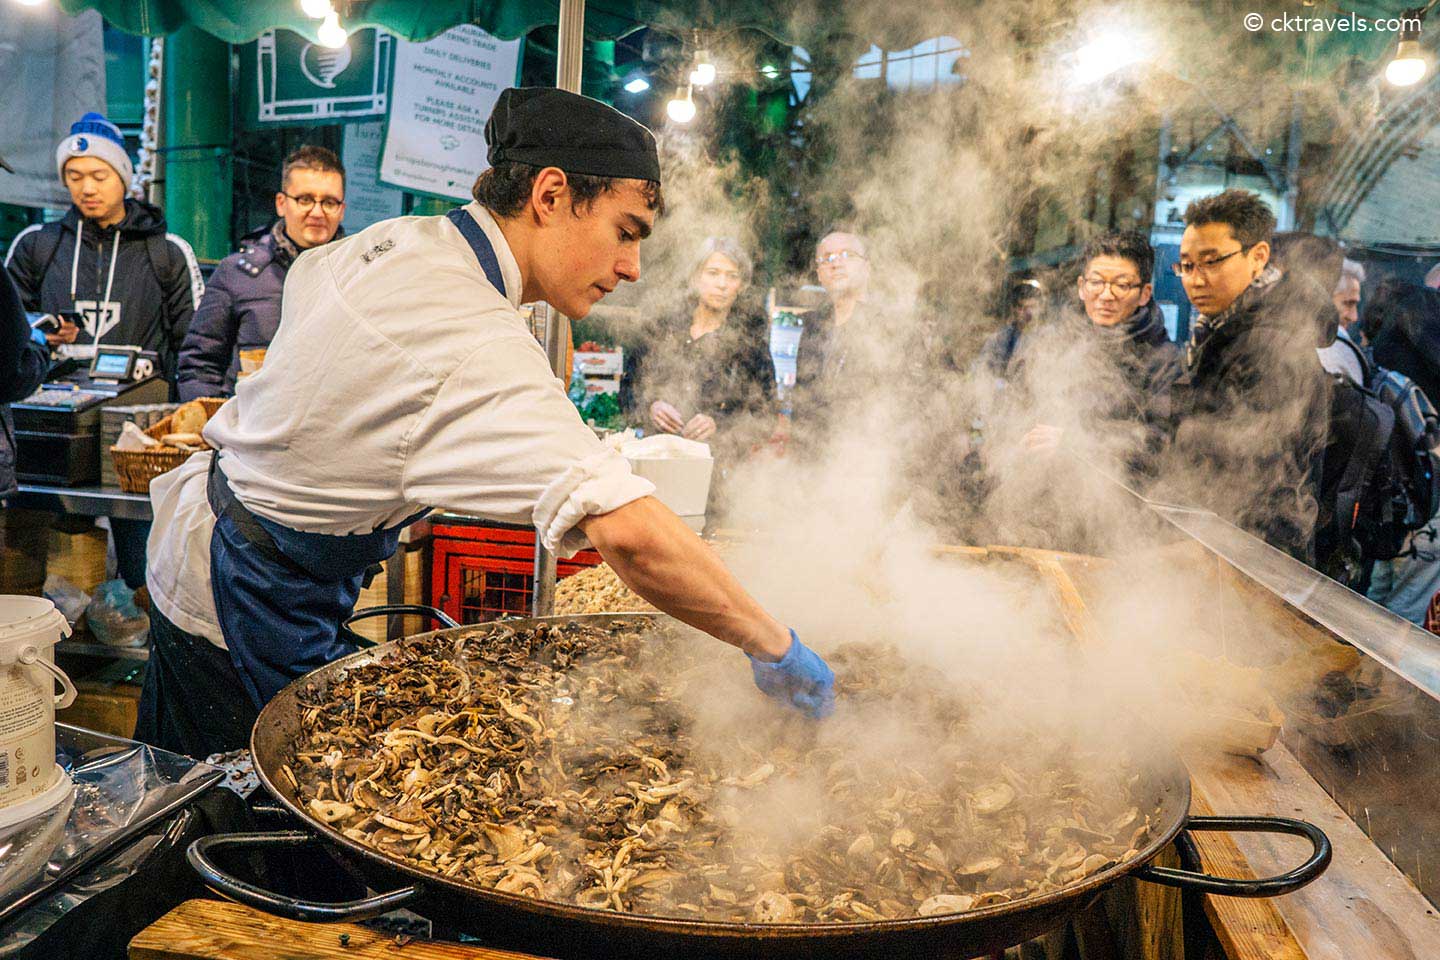 mushroom risotto stall at Borough Market guide - London's most famous food market